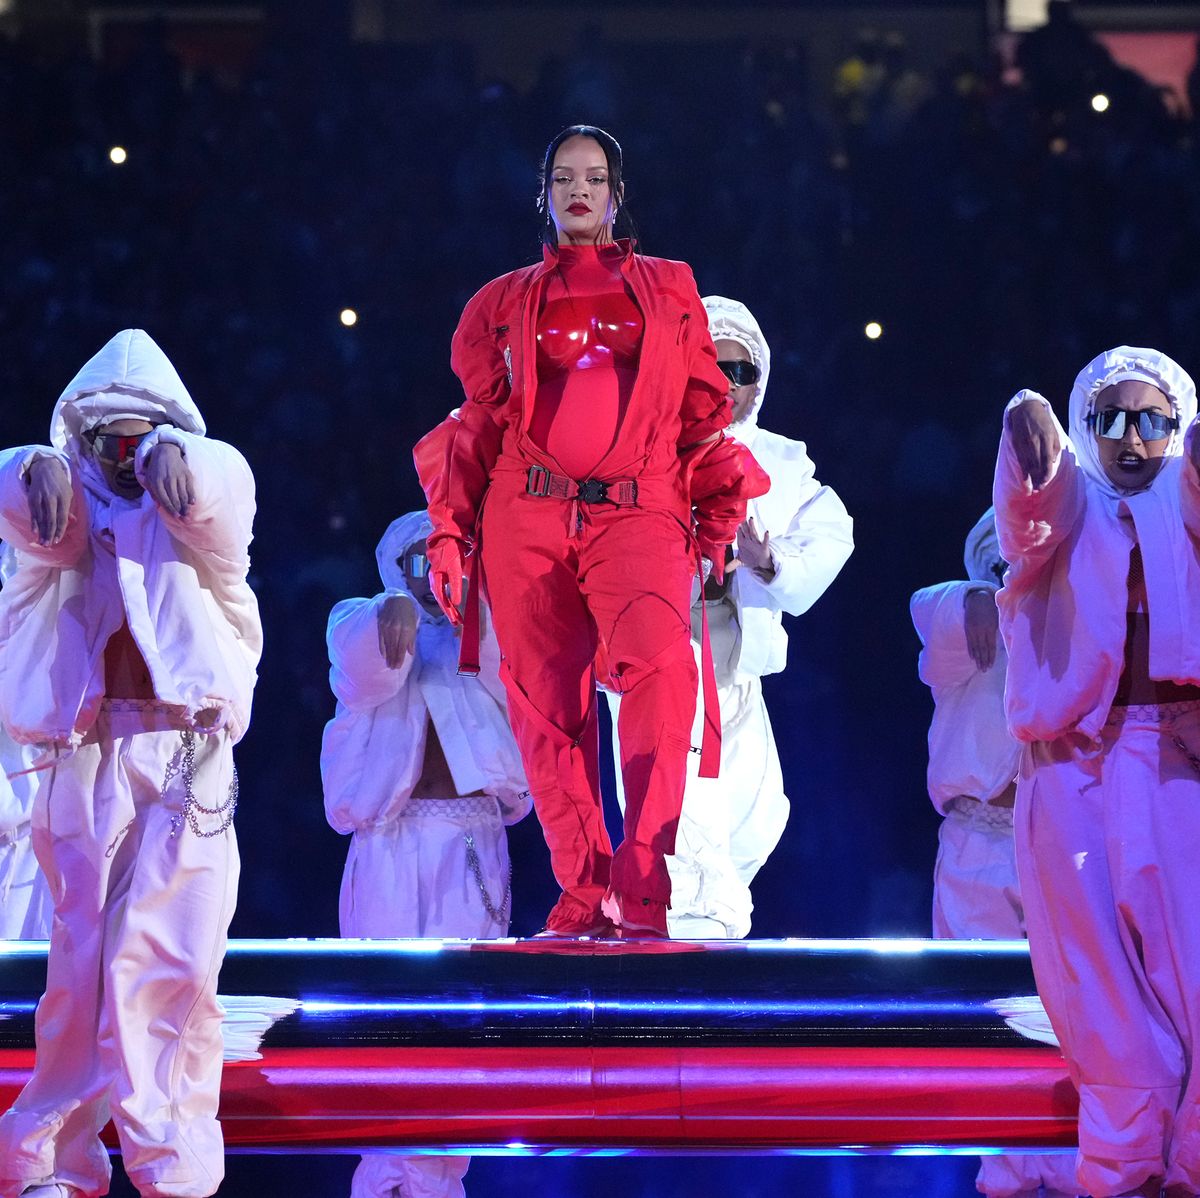 Now You Can Own Rihanna's Super Bowl Halftime Show Look